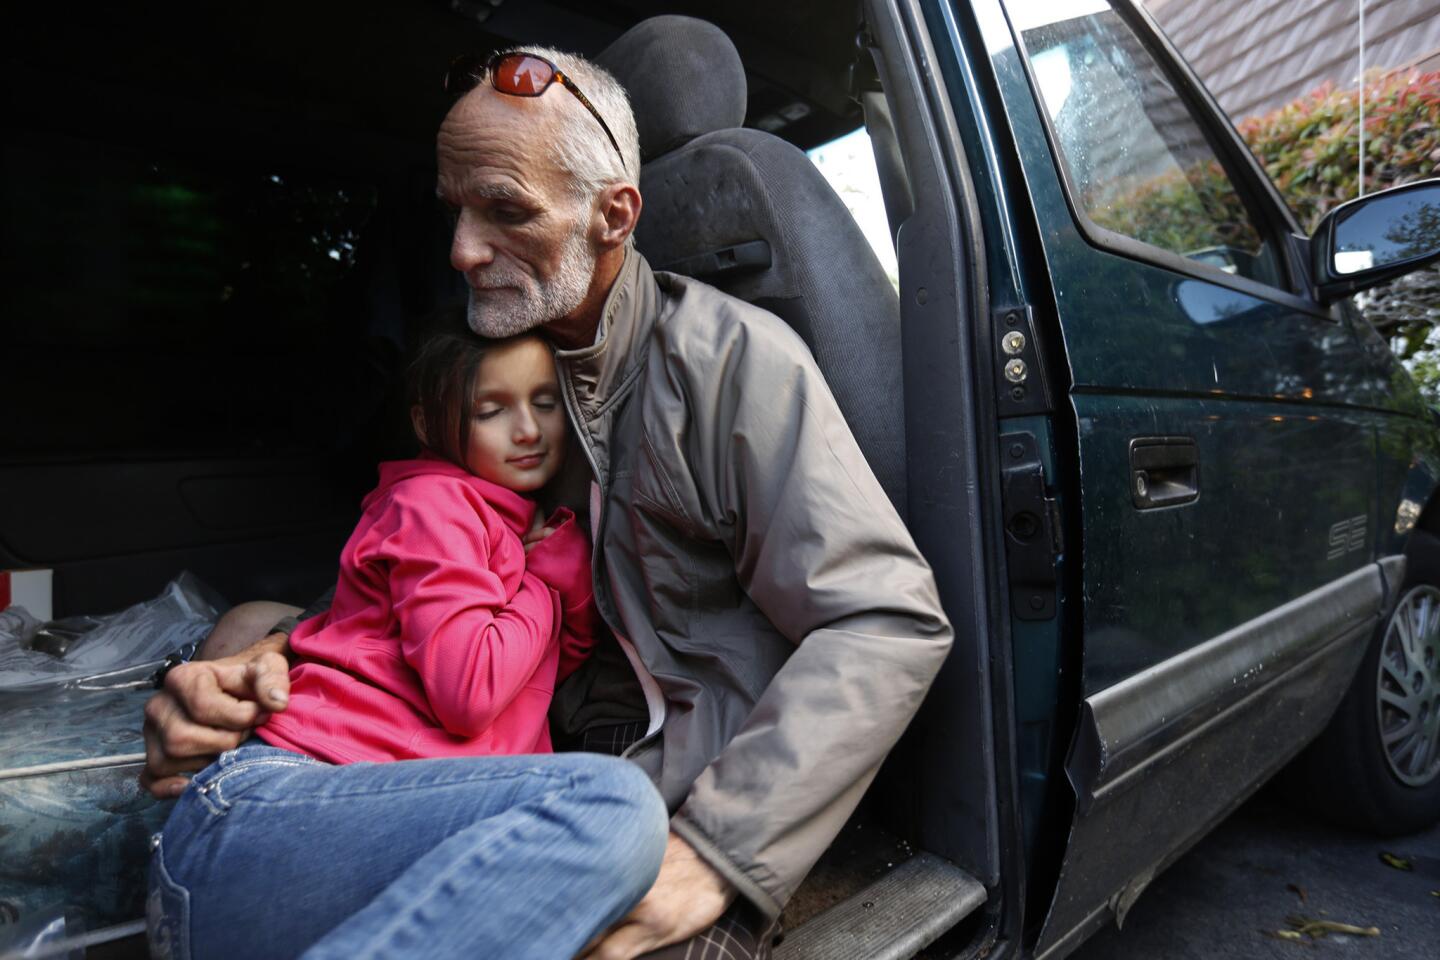 "It's been a tough year," said Thomas Goodwin, 54, with his daughter Leilani Miranda Duenez Goodwin, 7, in the van that has been their home for several months. They participate in the 'safe parking' program in Santa Barbara.